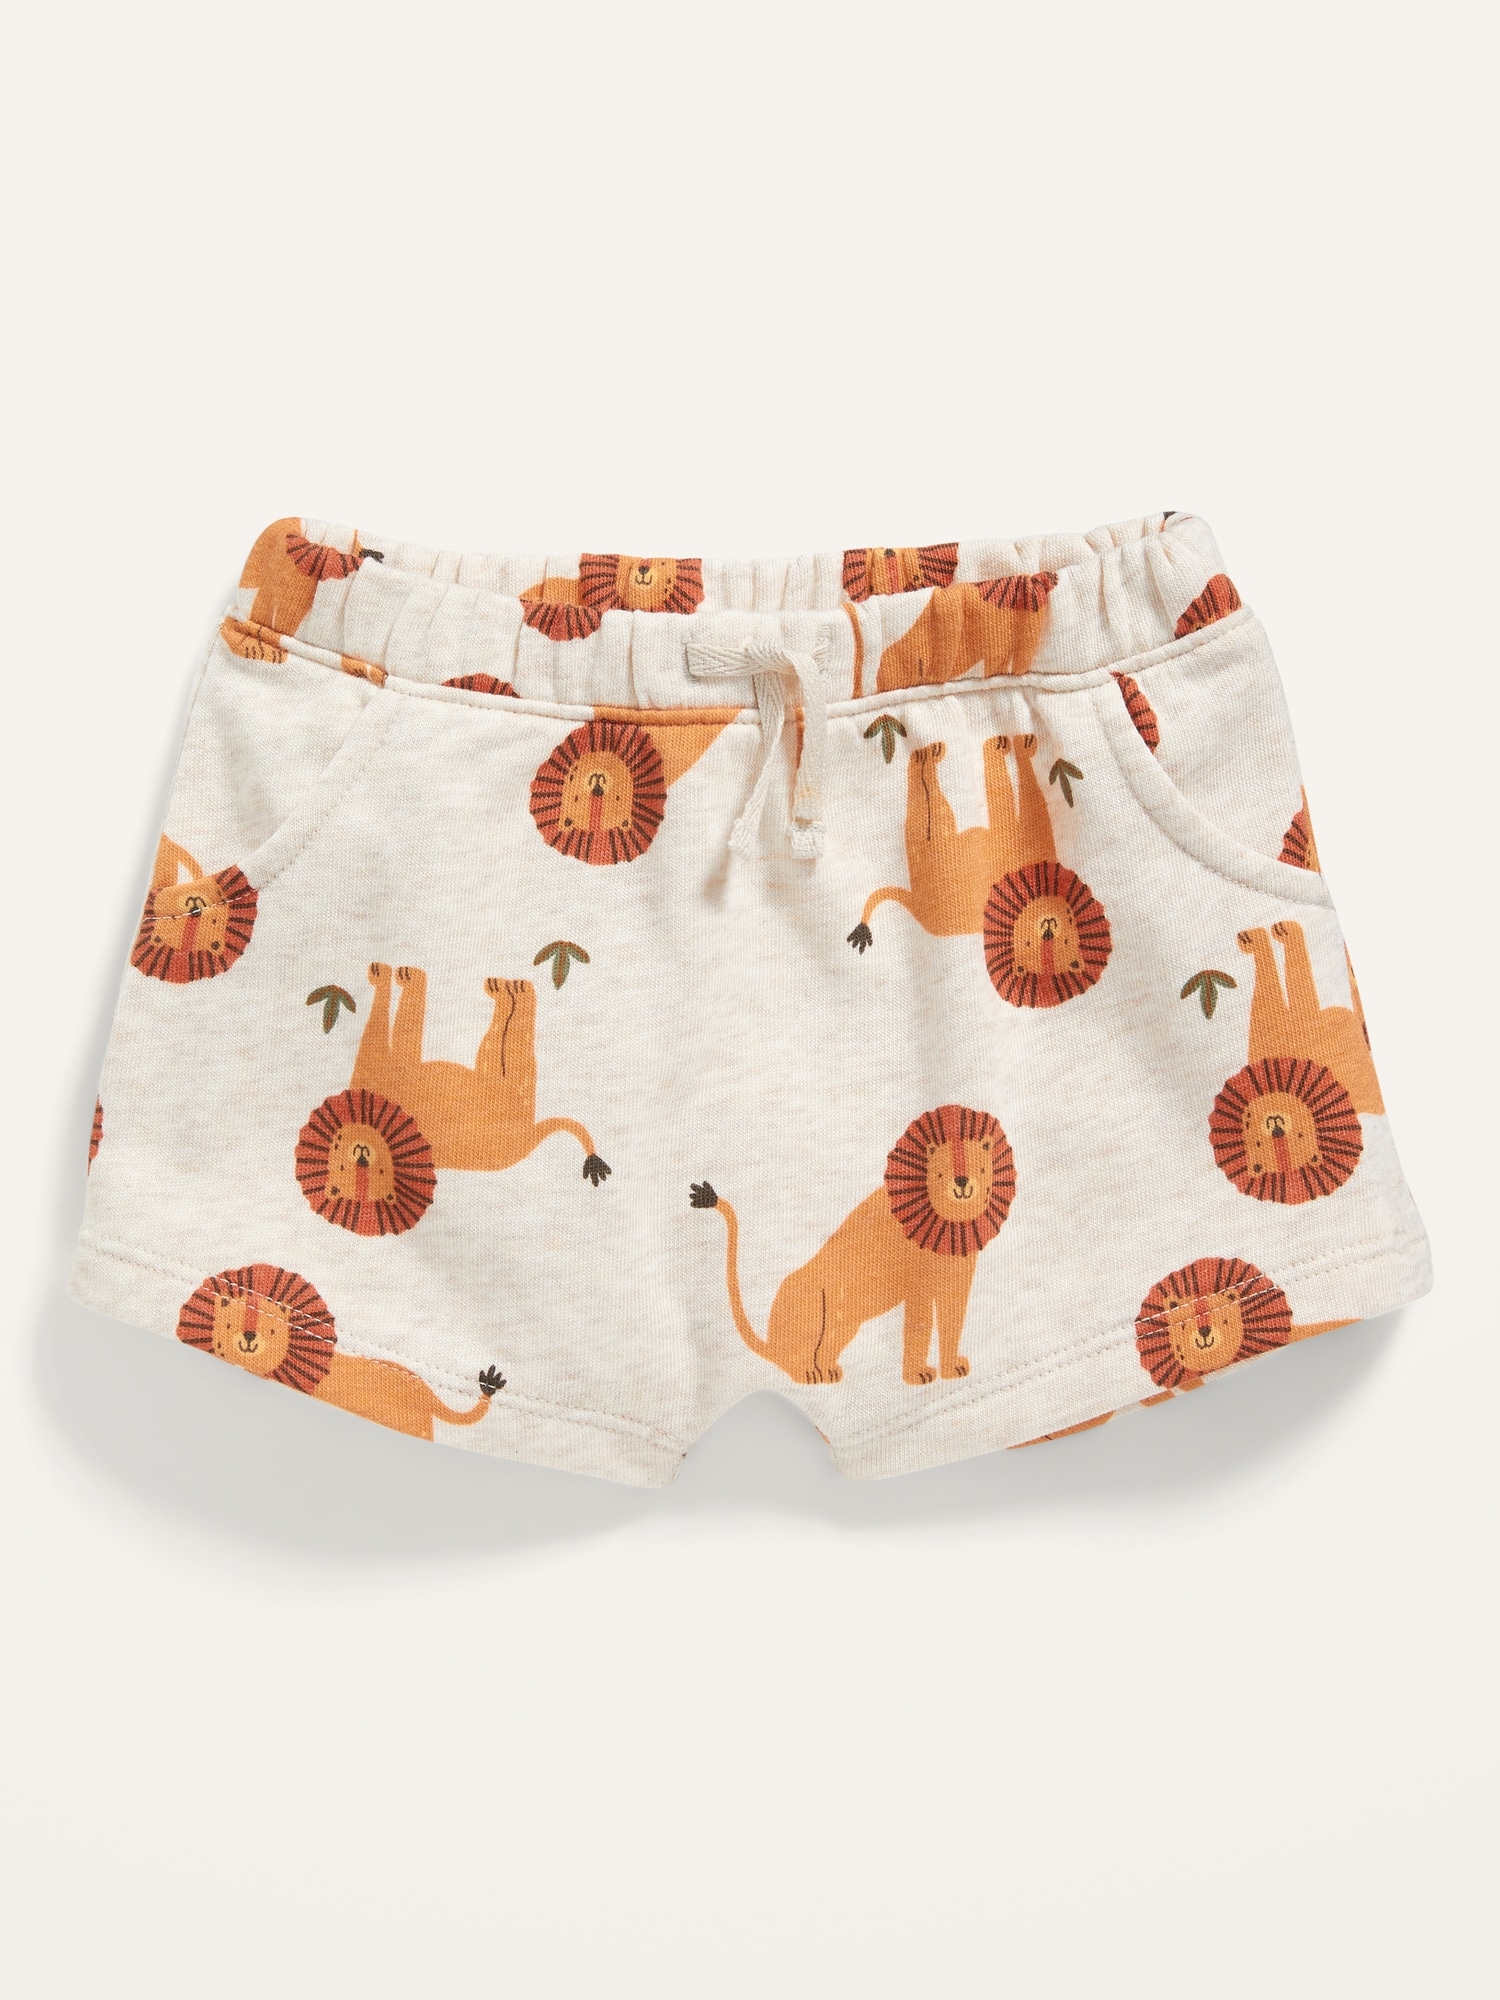 Lion-Print French Terry Shorts for Baby